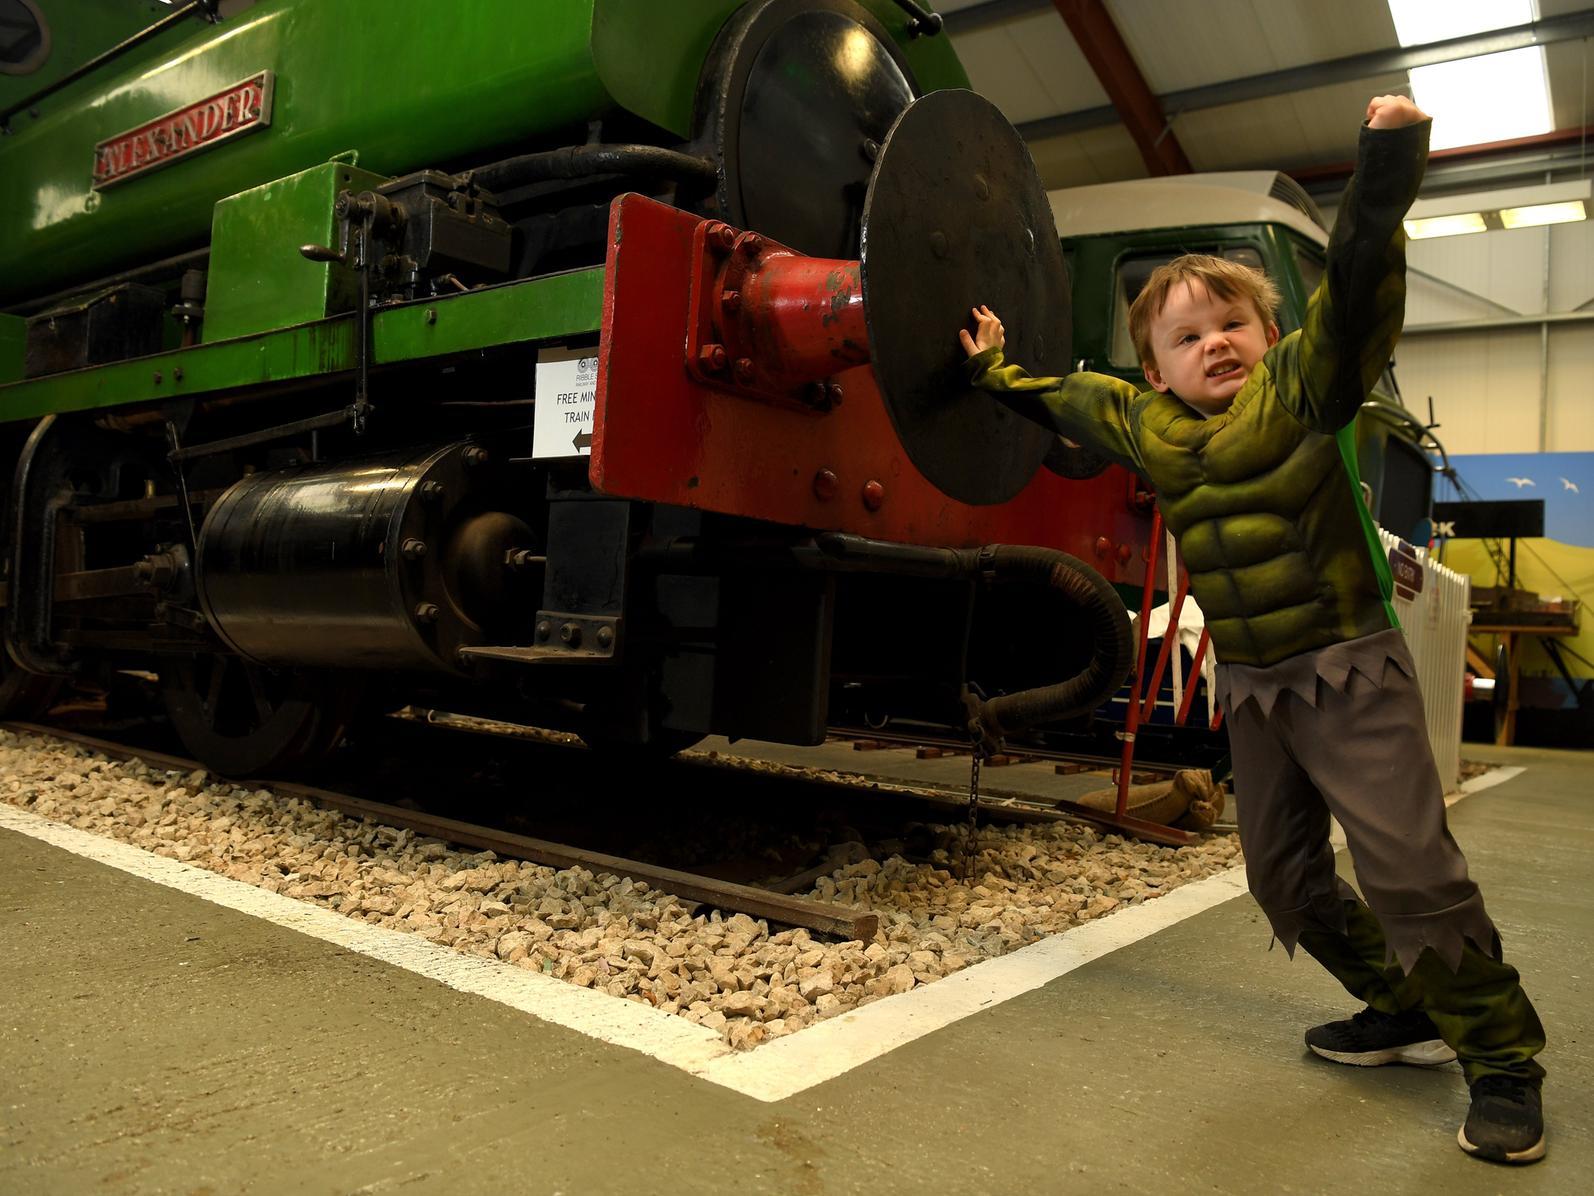 Superhero day at Ribble Steam Railway and Museum
Ethan Collings as the Hulk.